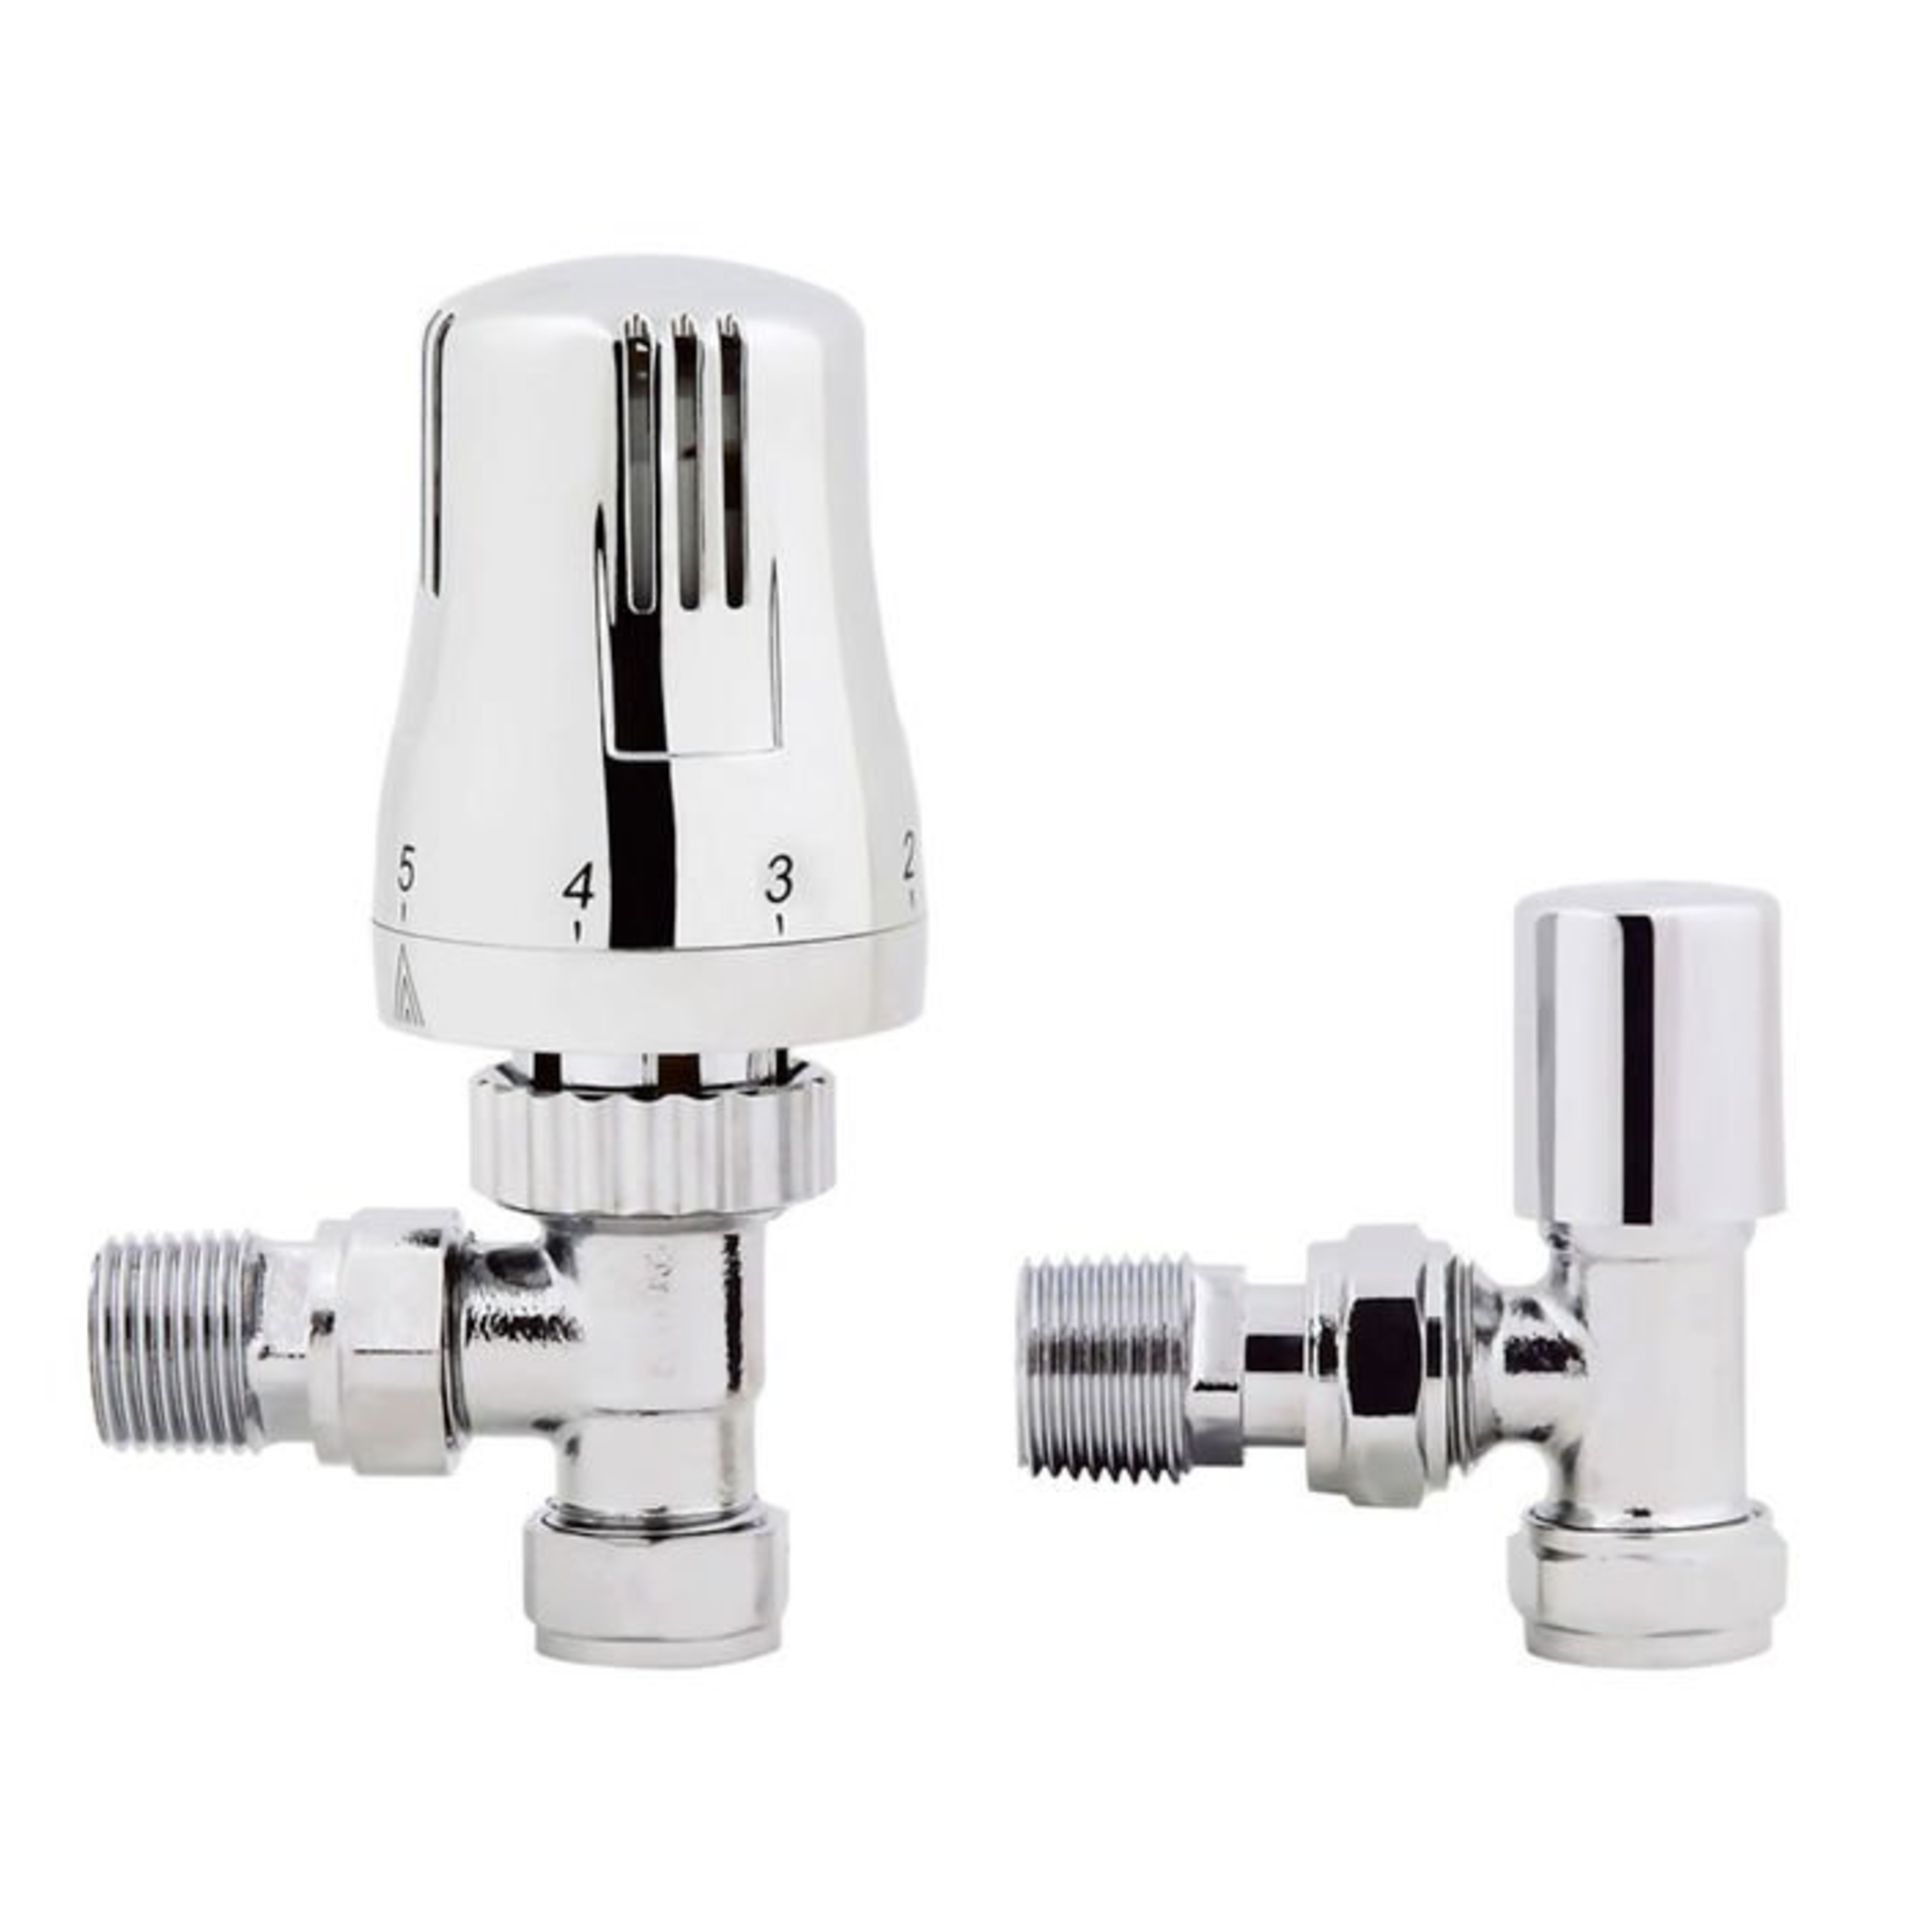 (G148) 15mm Standard Connection Thermostatic Angled Chrome Radiator Valves Chrome Plated Solid Brass